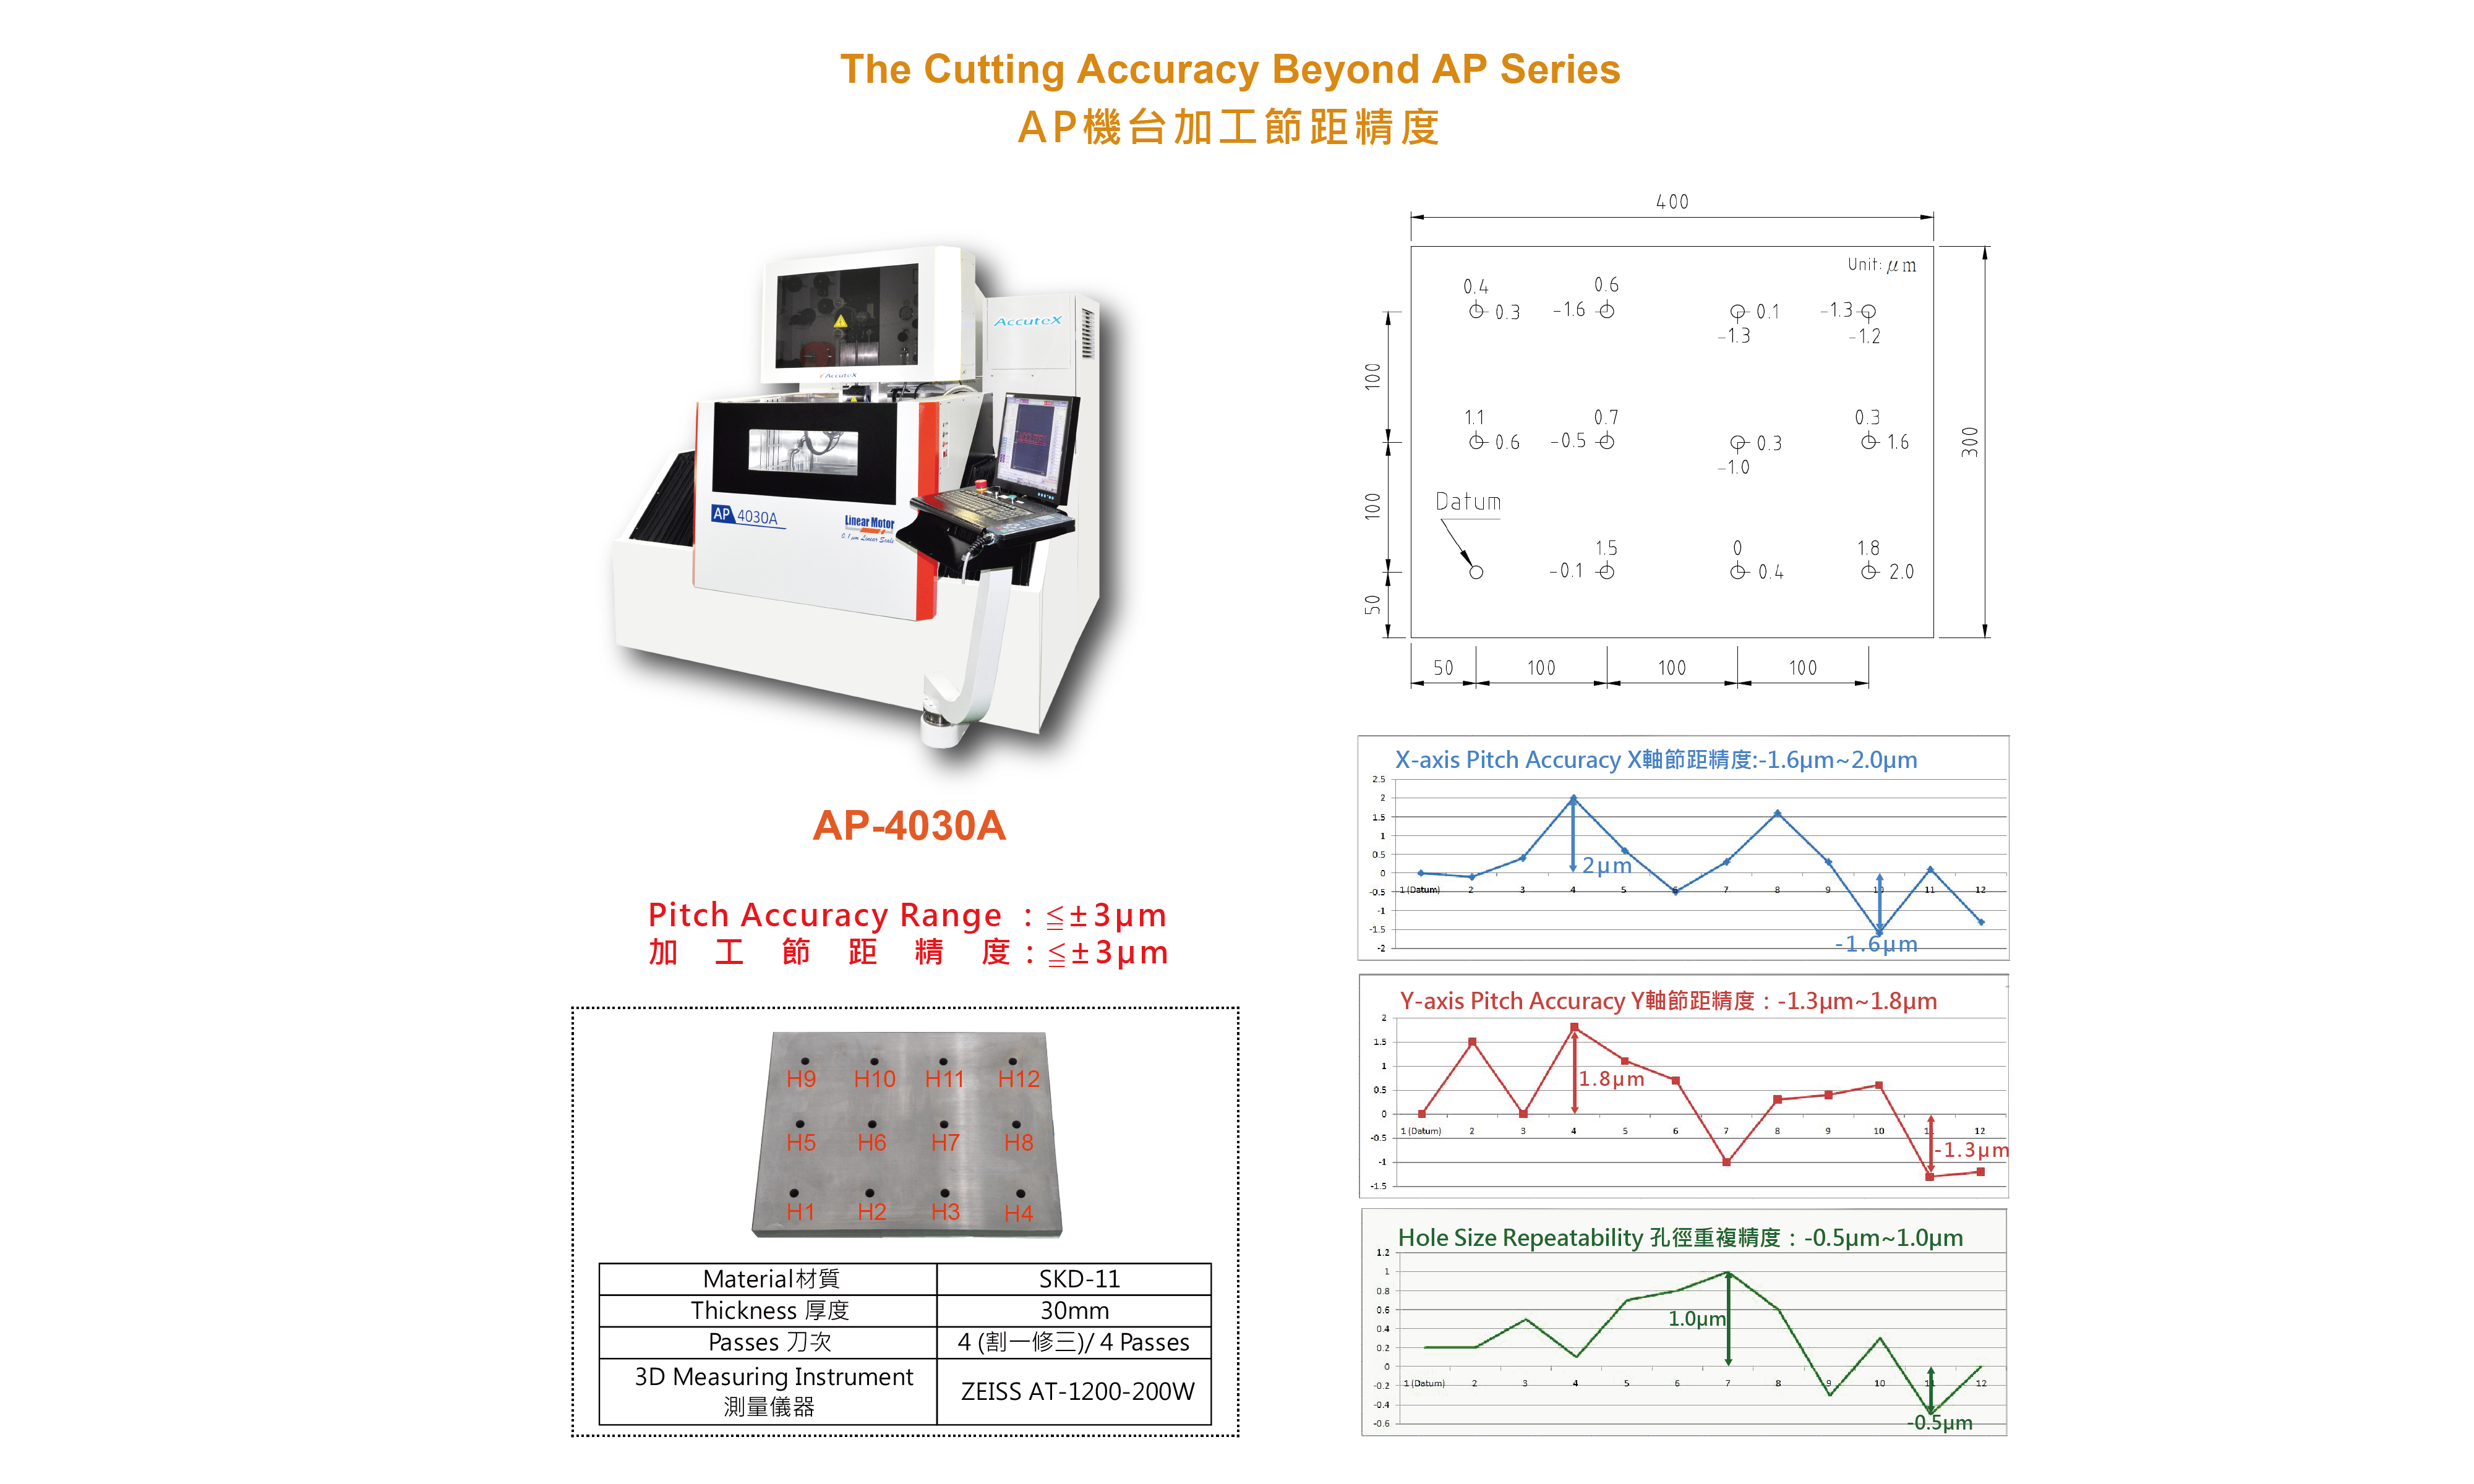 Video|The Cutting Accuracy Beyond AP Series